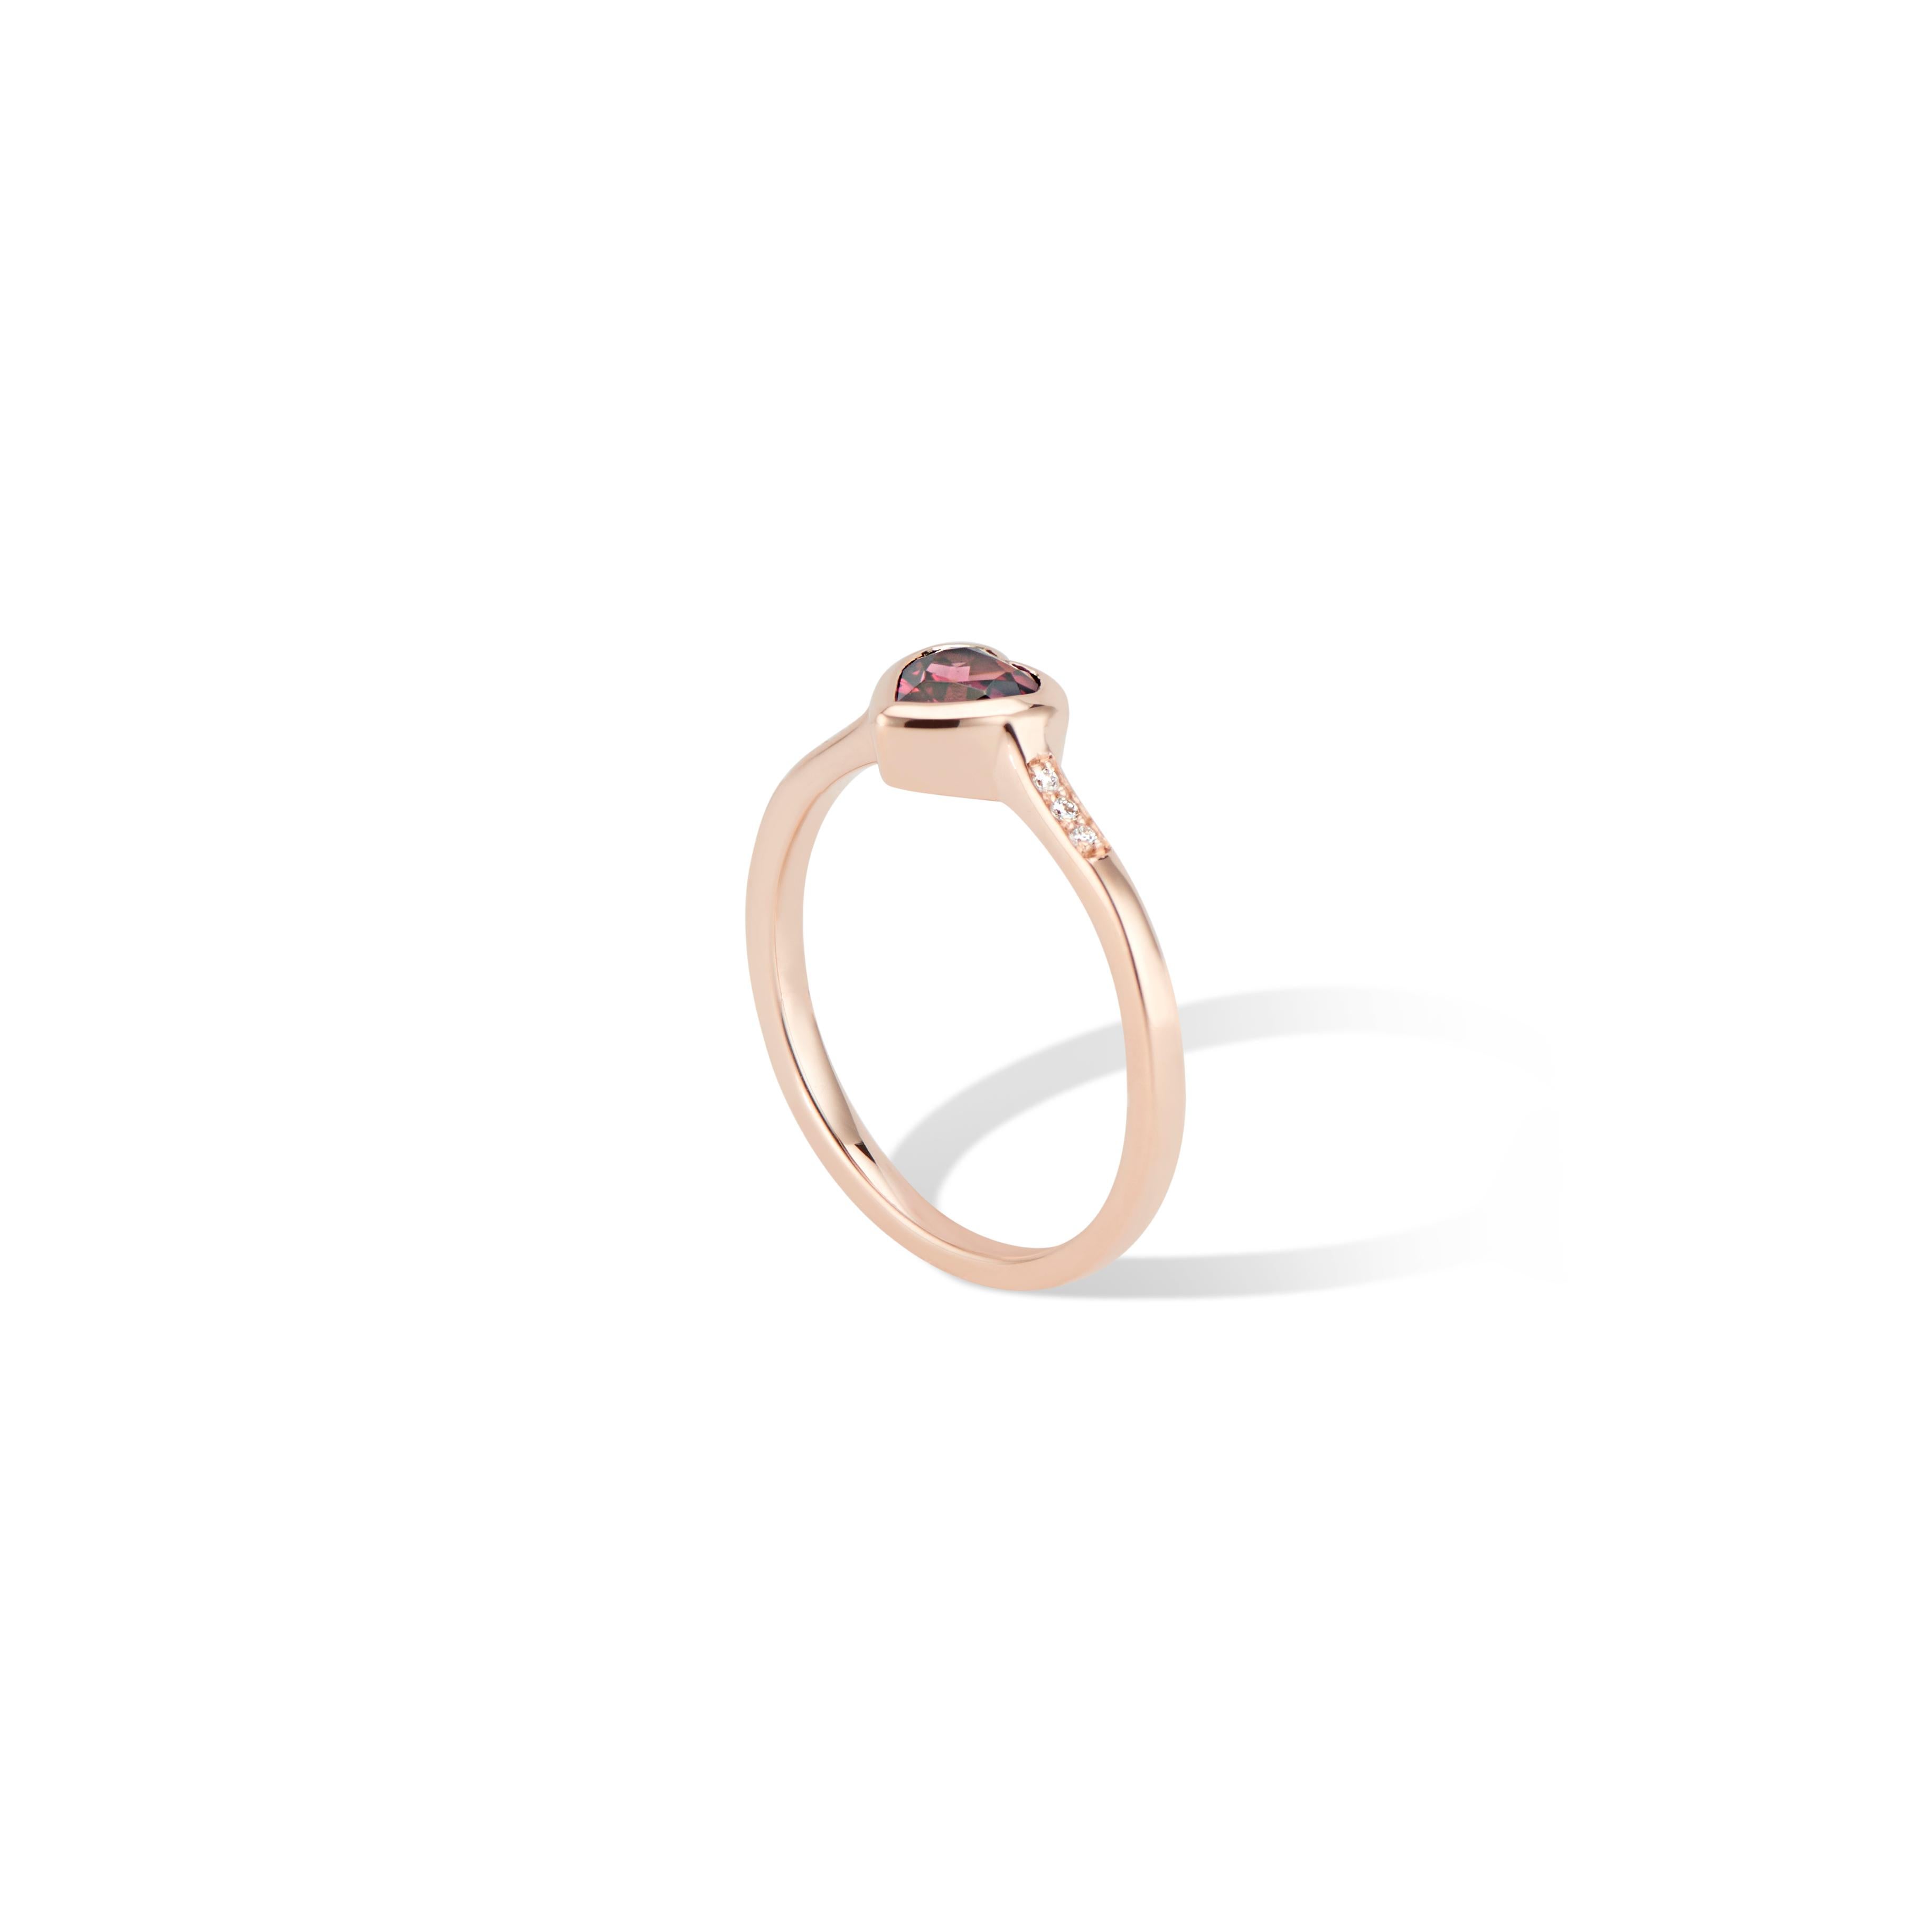 This 14K Rose Gold Diamond and Rhodolite Heart Ring is a petite stacking ring. 
Layer with more hearts, bezel set gems or stacking bands.

Featuring a striking ½ carat (.50tcw) Rhodolite Garnet Heart and in a polished bezel setting, with 
a little